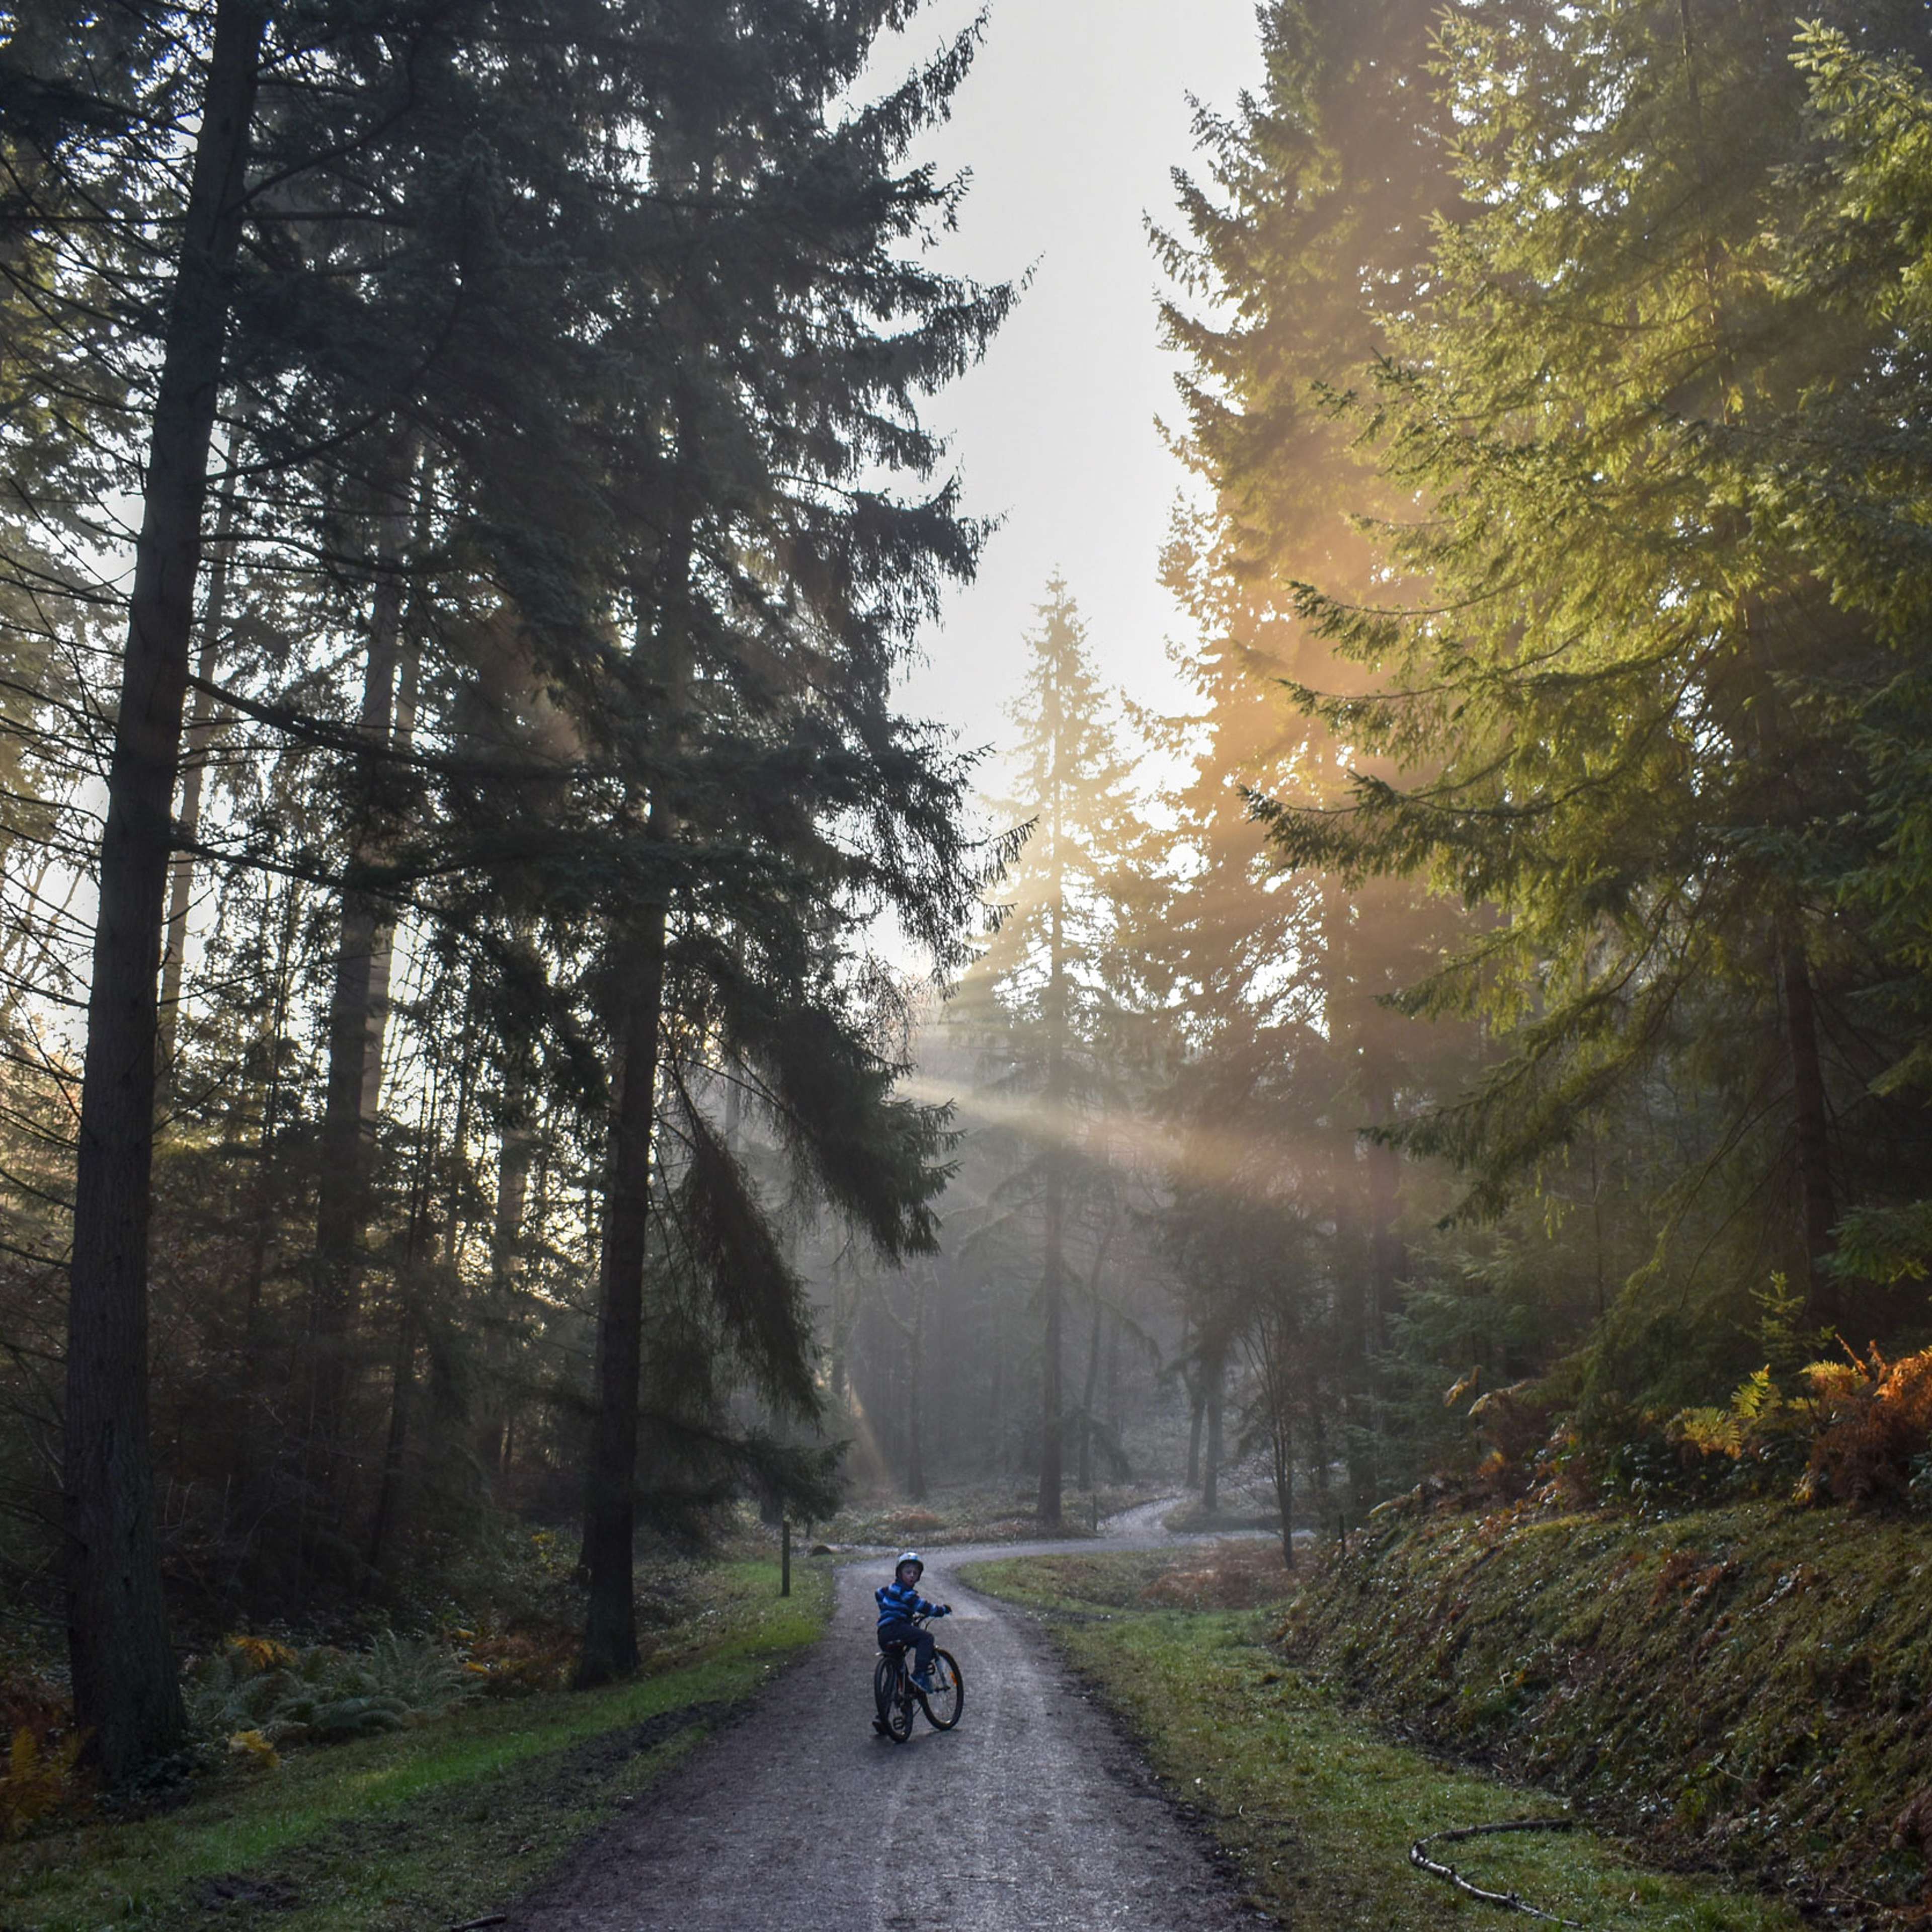 Boy riding a bicycle on a road amidst trees in a forest